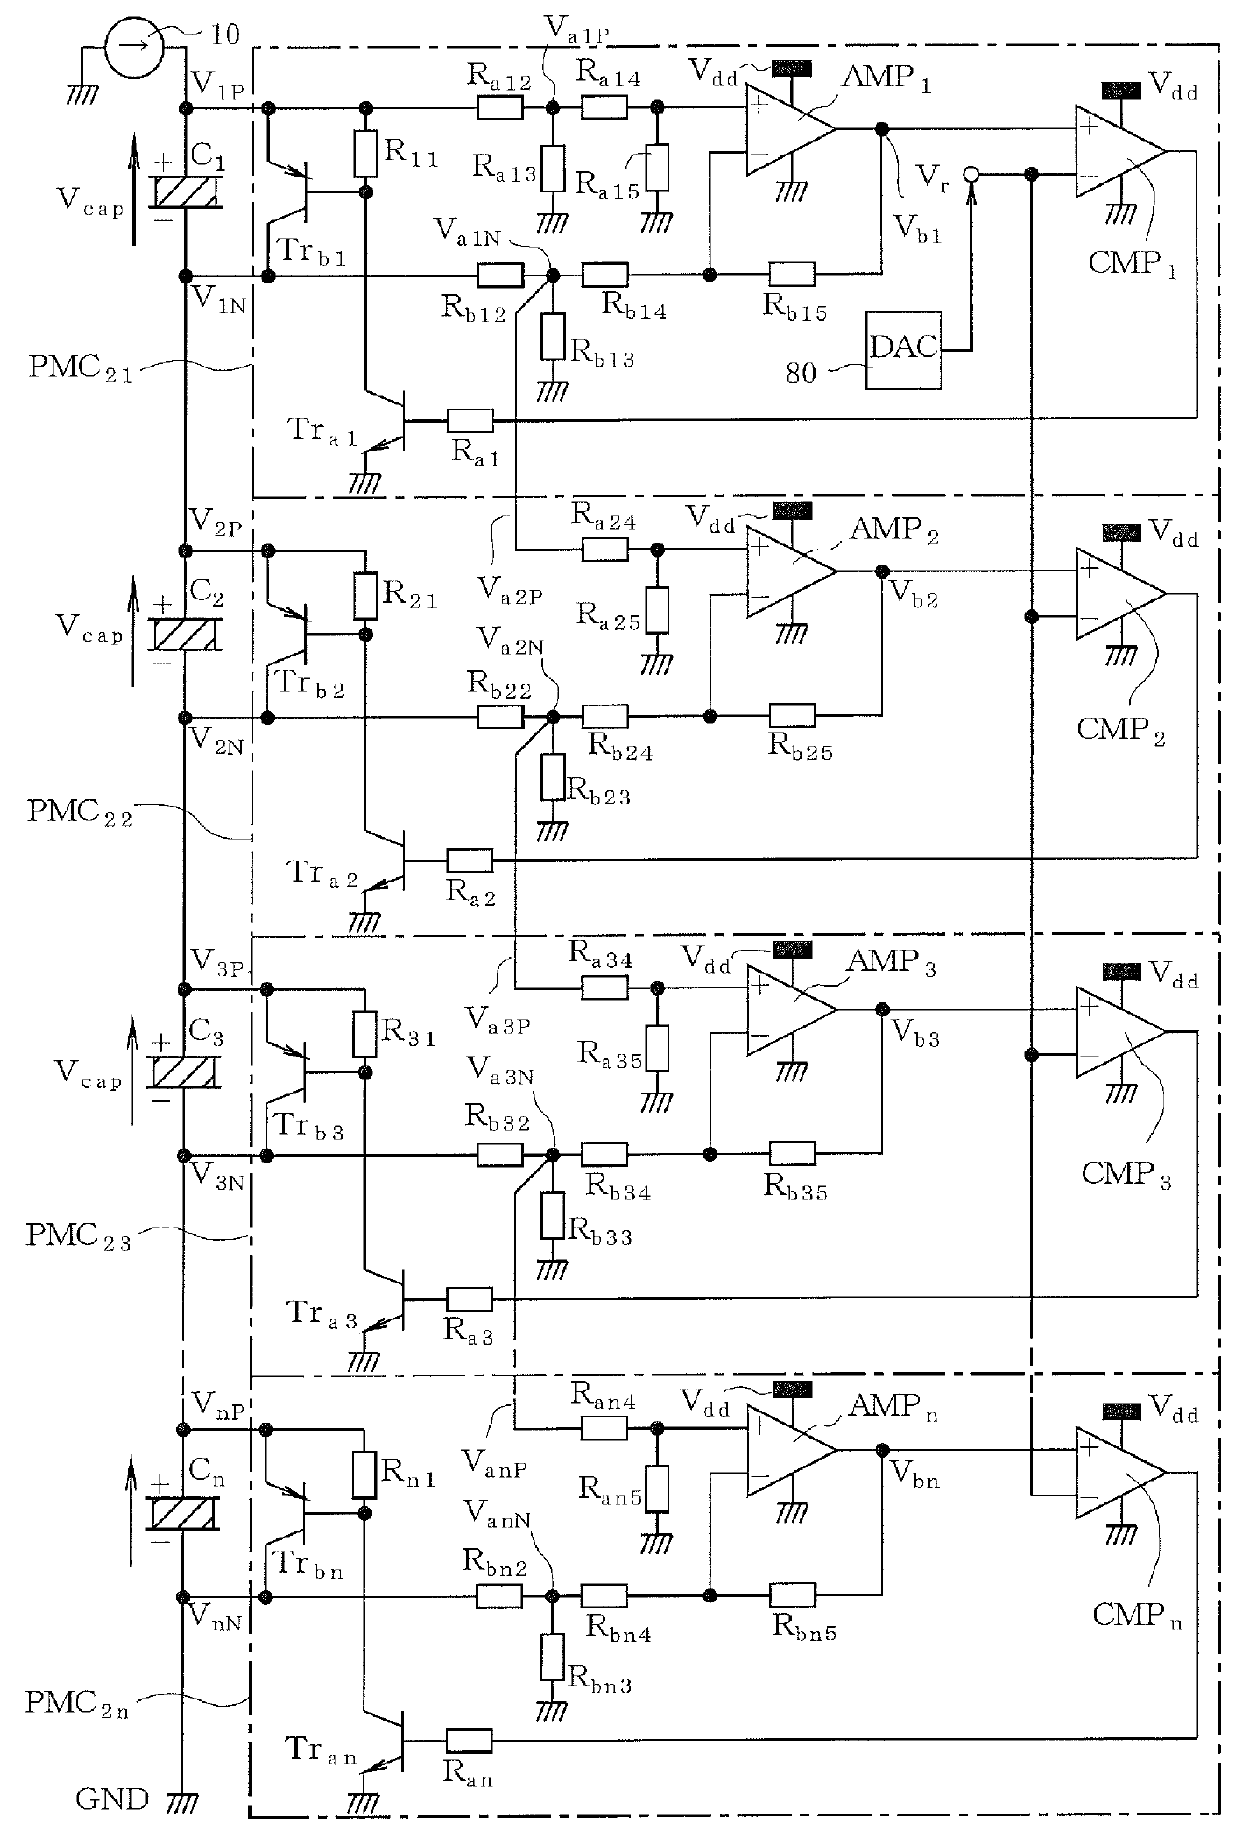 Parallel monitoring circuit for capacitor